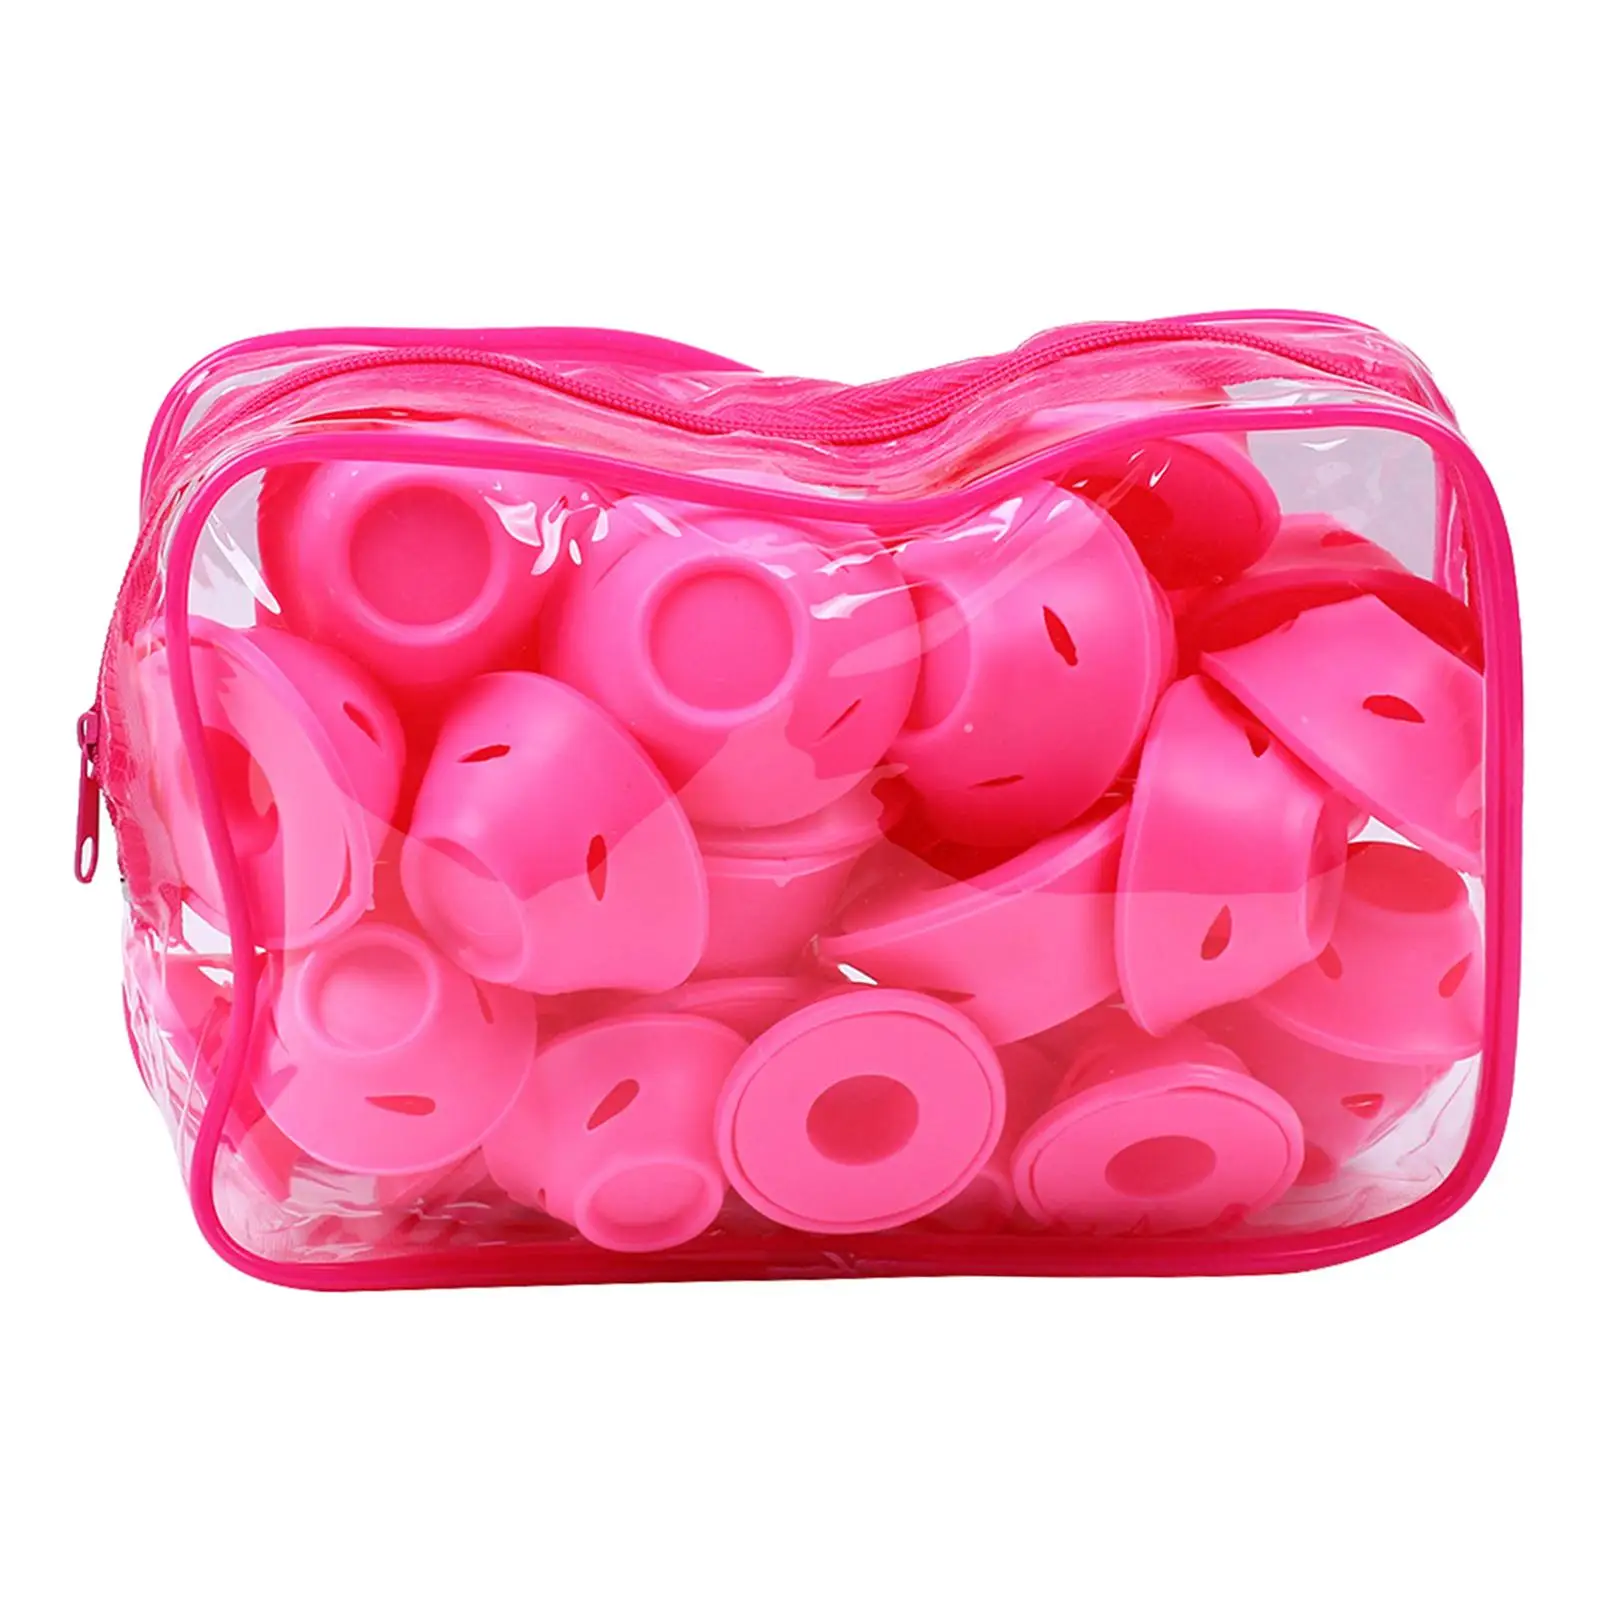 30x Hair Rollers Mushroom Design Silicone No Heat Curling for Natural Curls